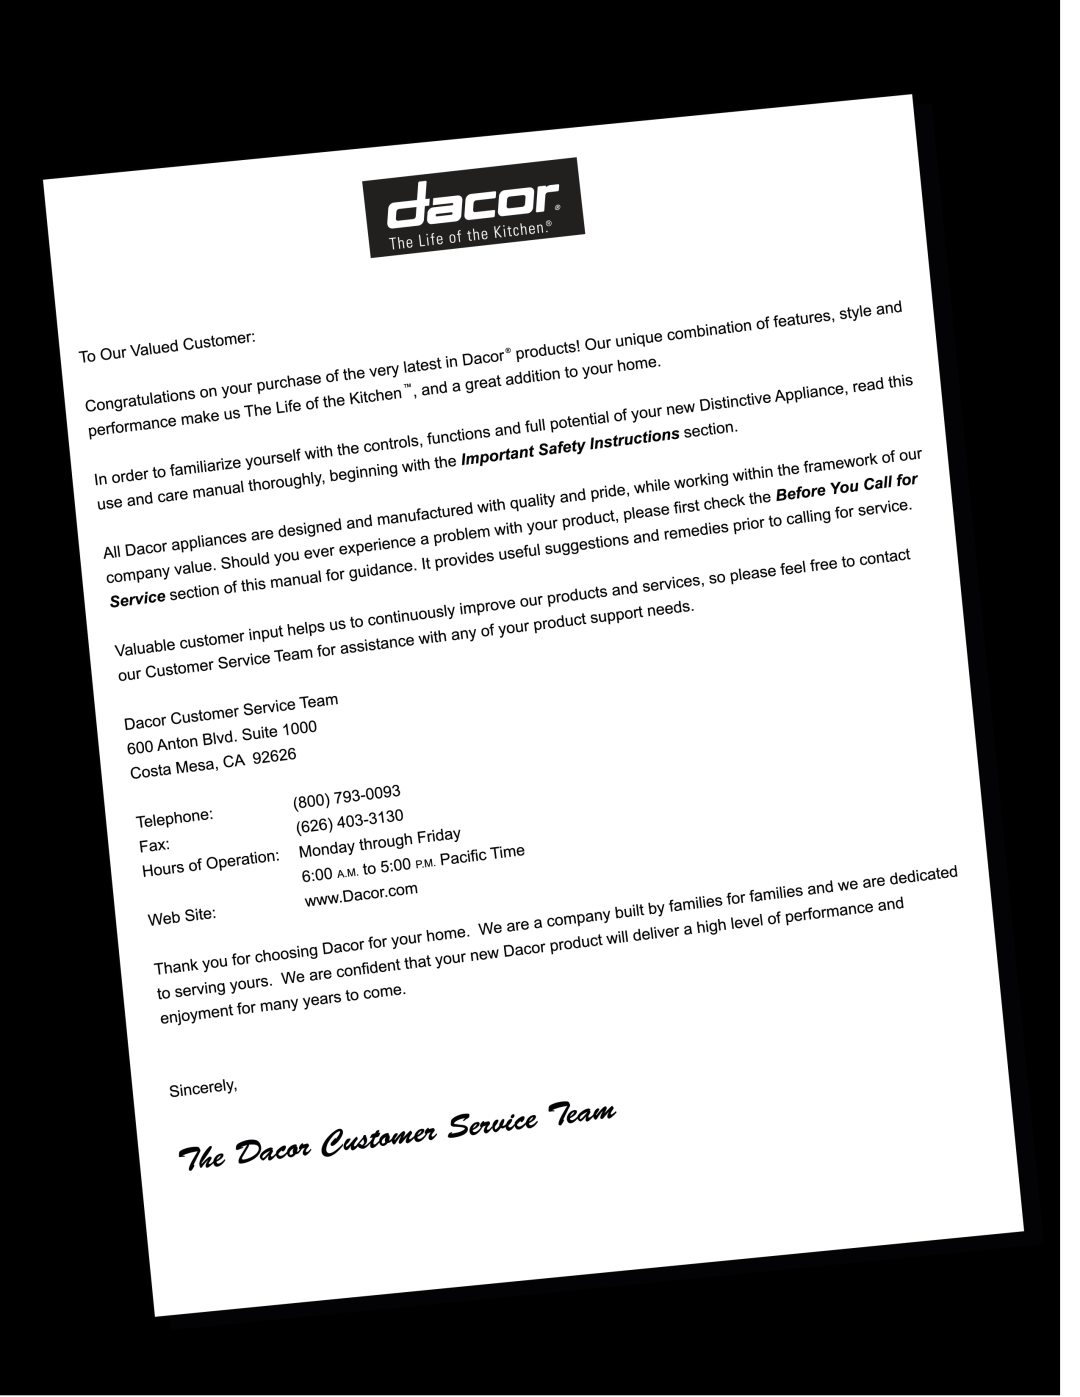 Dacor ETT304-1 manual Dacor, all rights reserved 